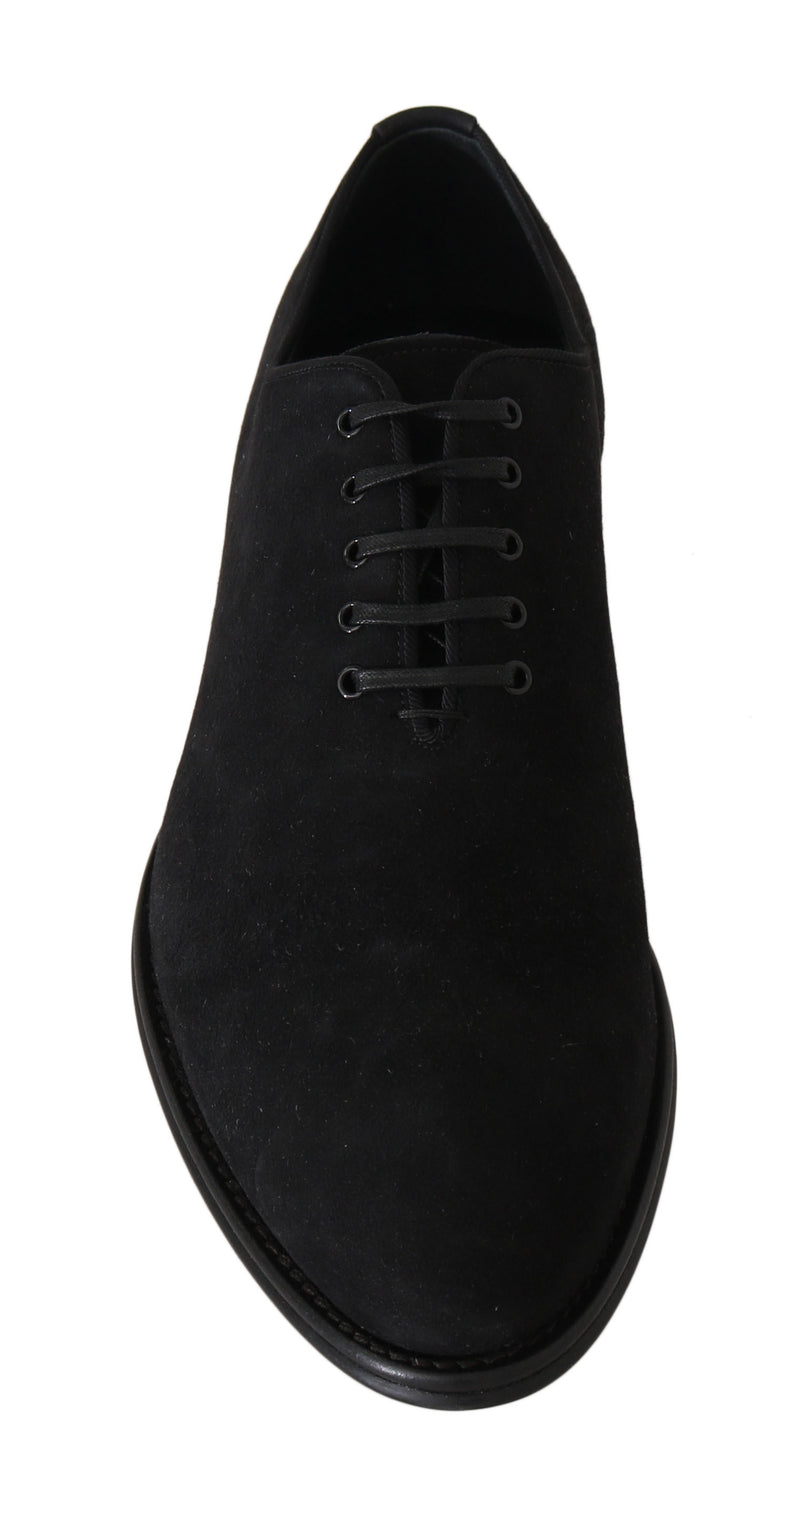 Black Suede Leather Derby Dress Shoes